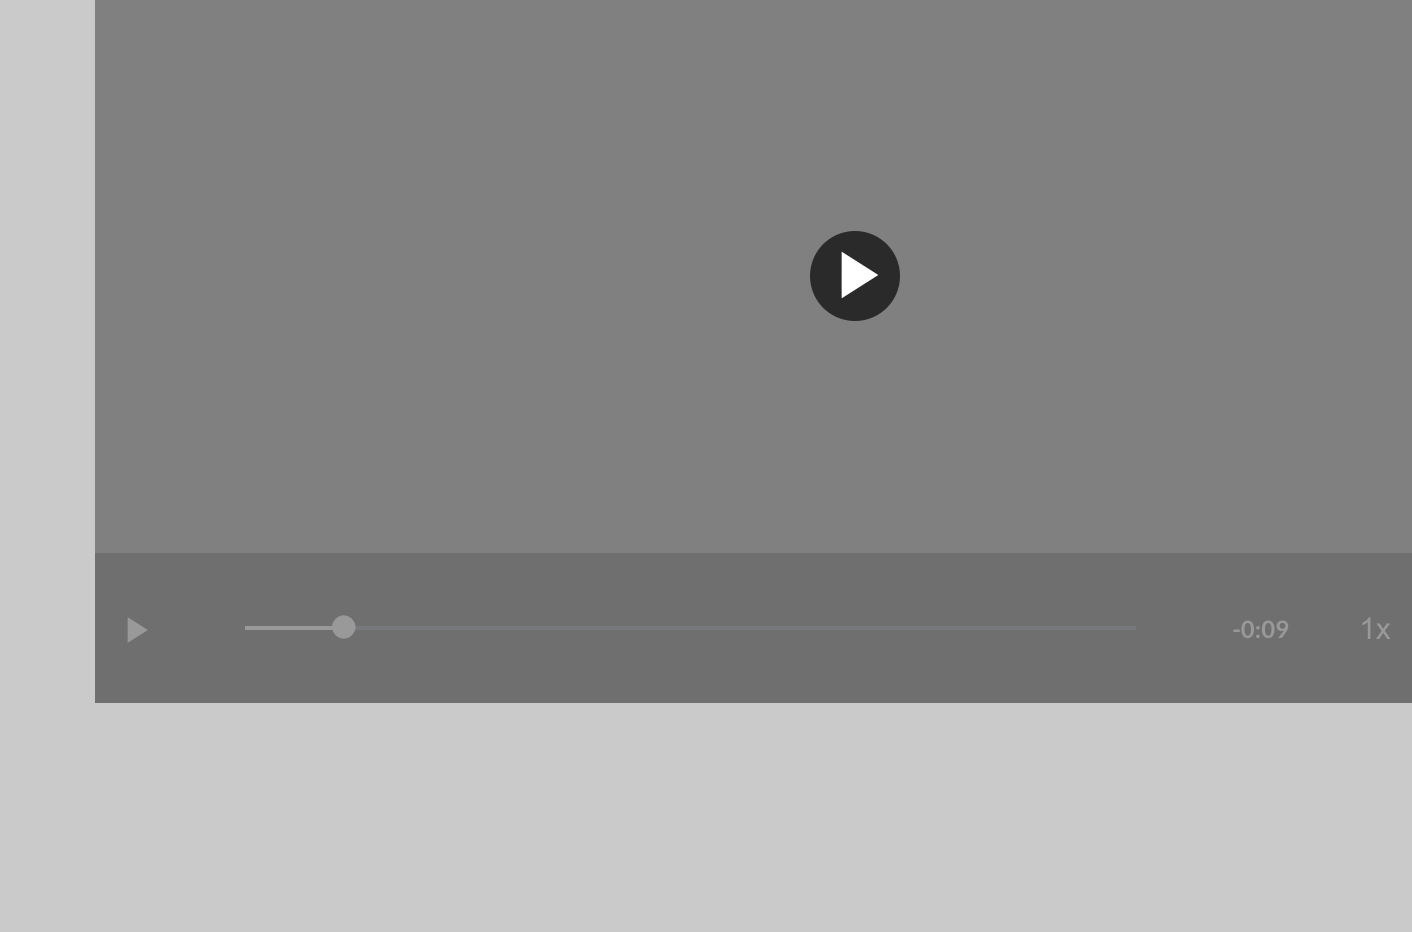 Video player: lower opacity of controls when paused